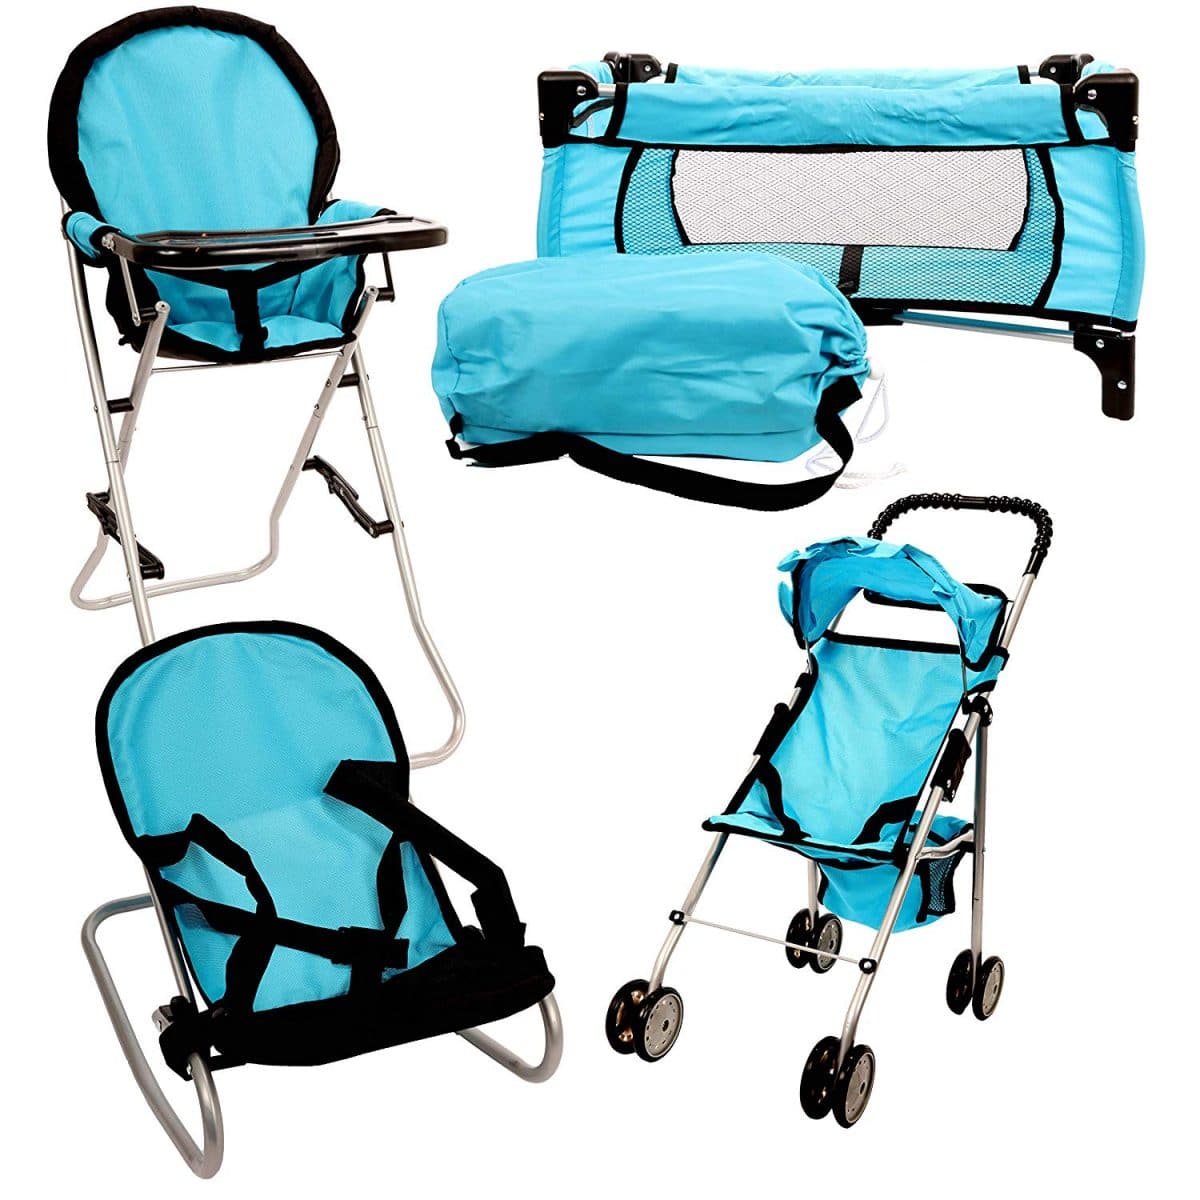 you and me baby doll high chair